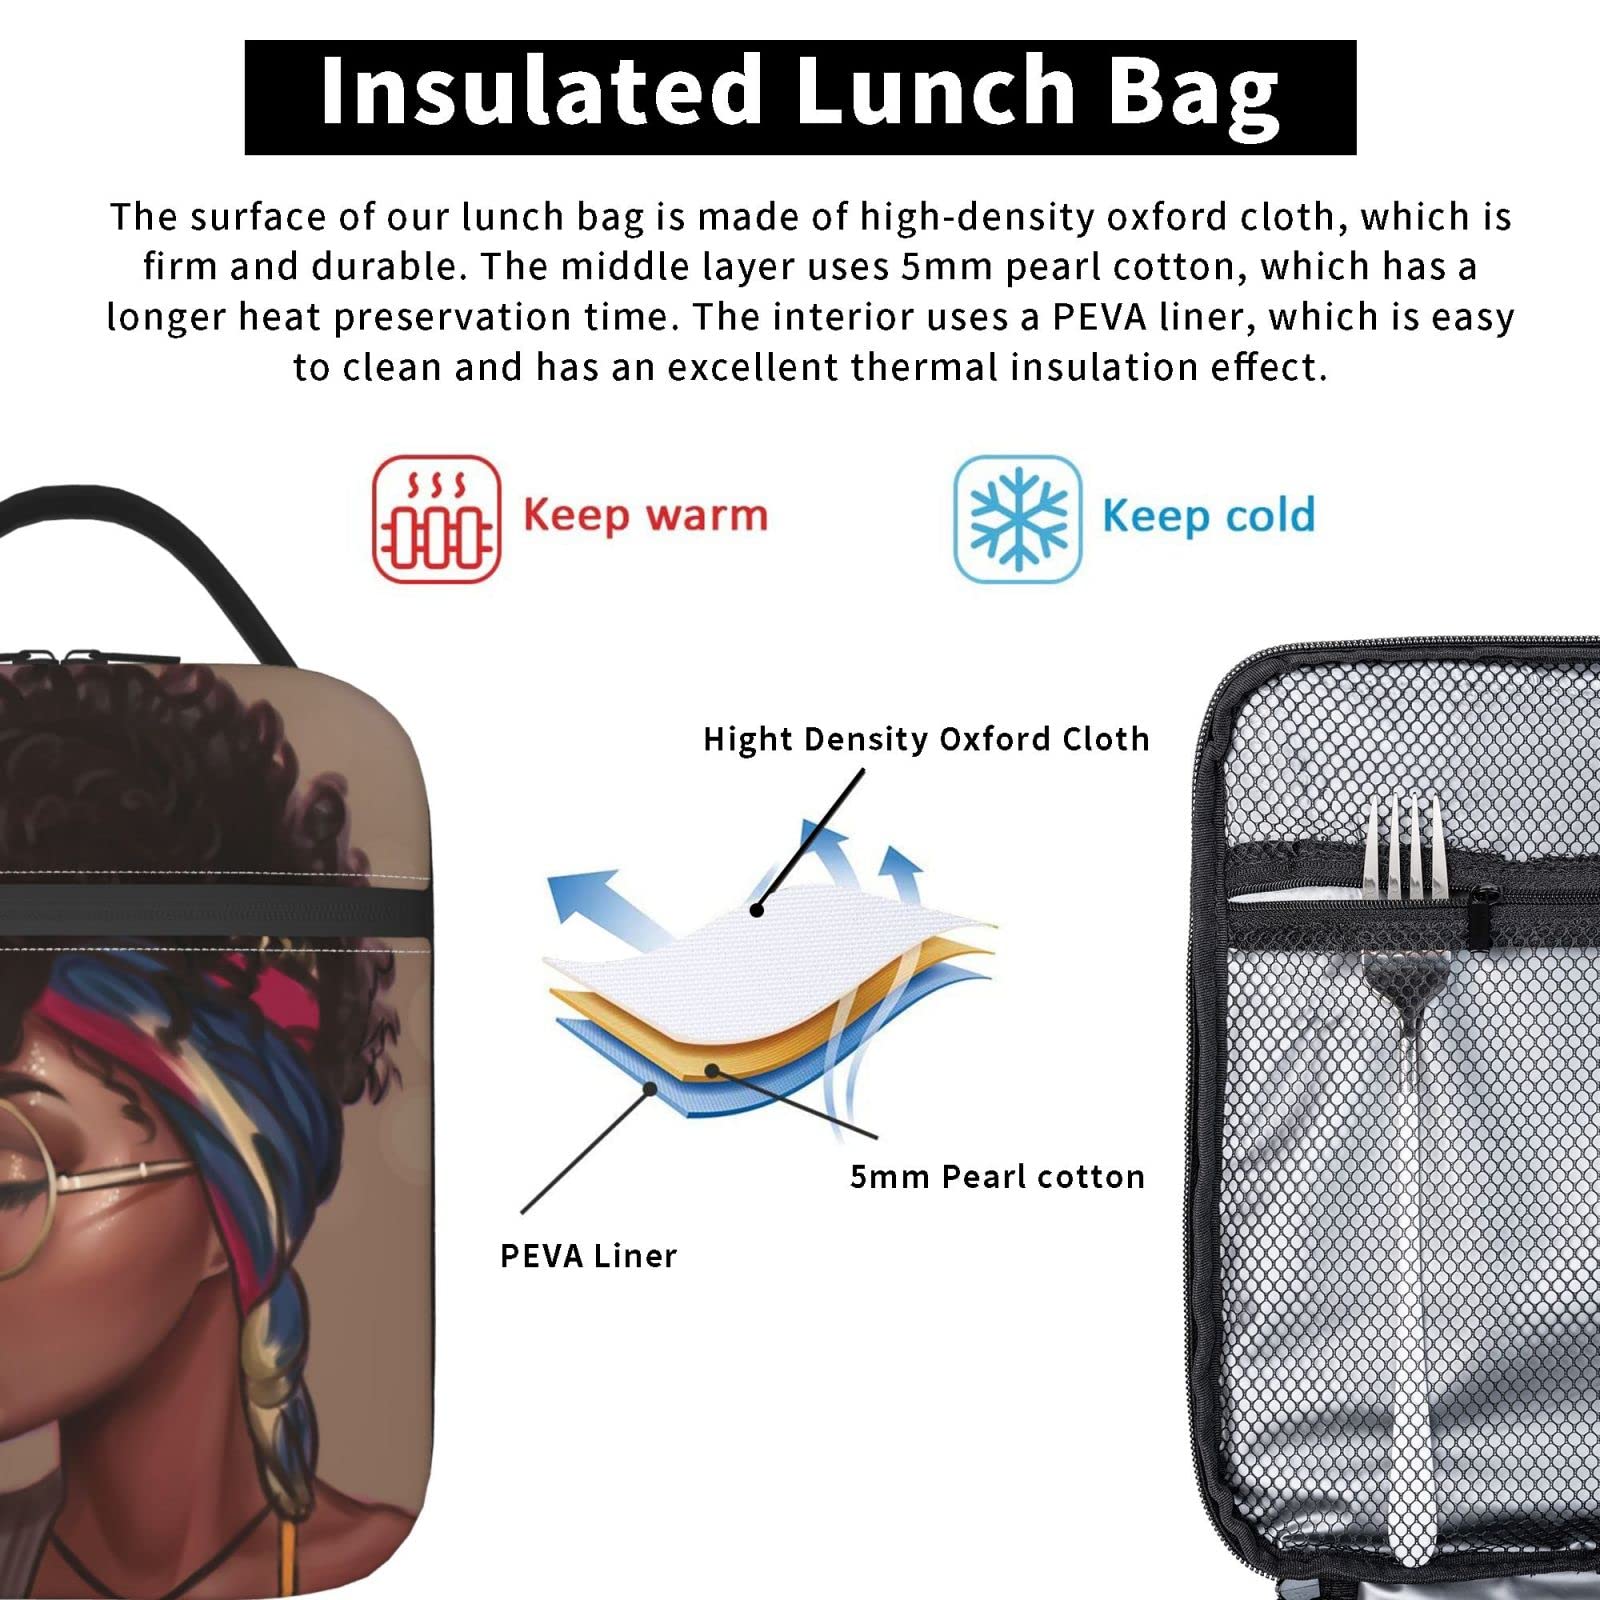 Abucaky African American Girl Portable Lunch Bag Insulated Meal Bag Reusable Lunch Box Black Woman Cooler Bag Food Container For School Work Travel Picnic Camping